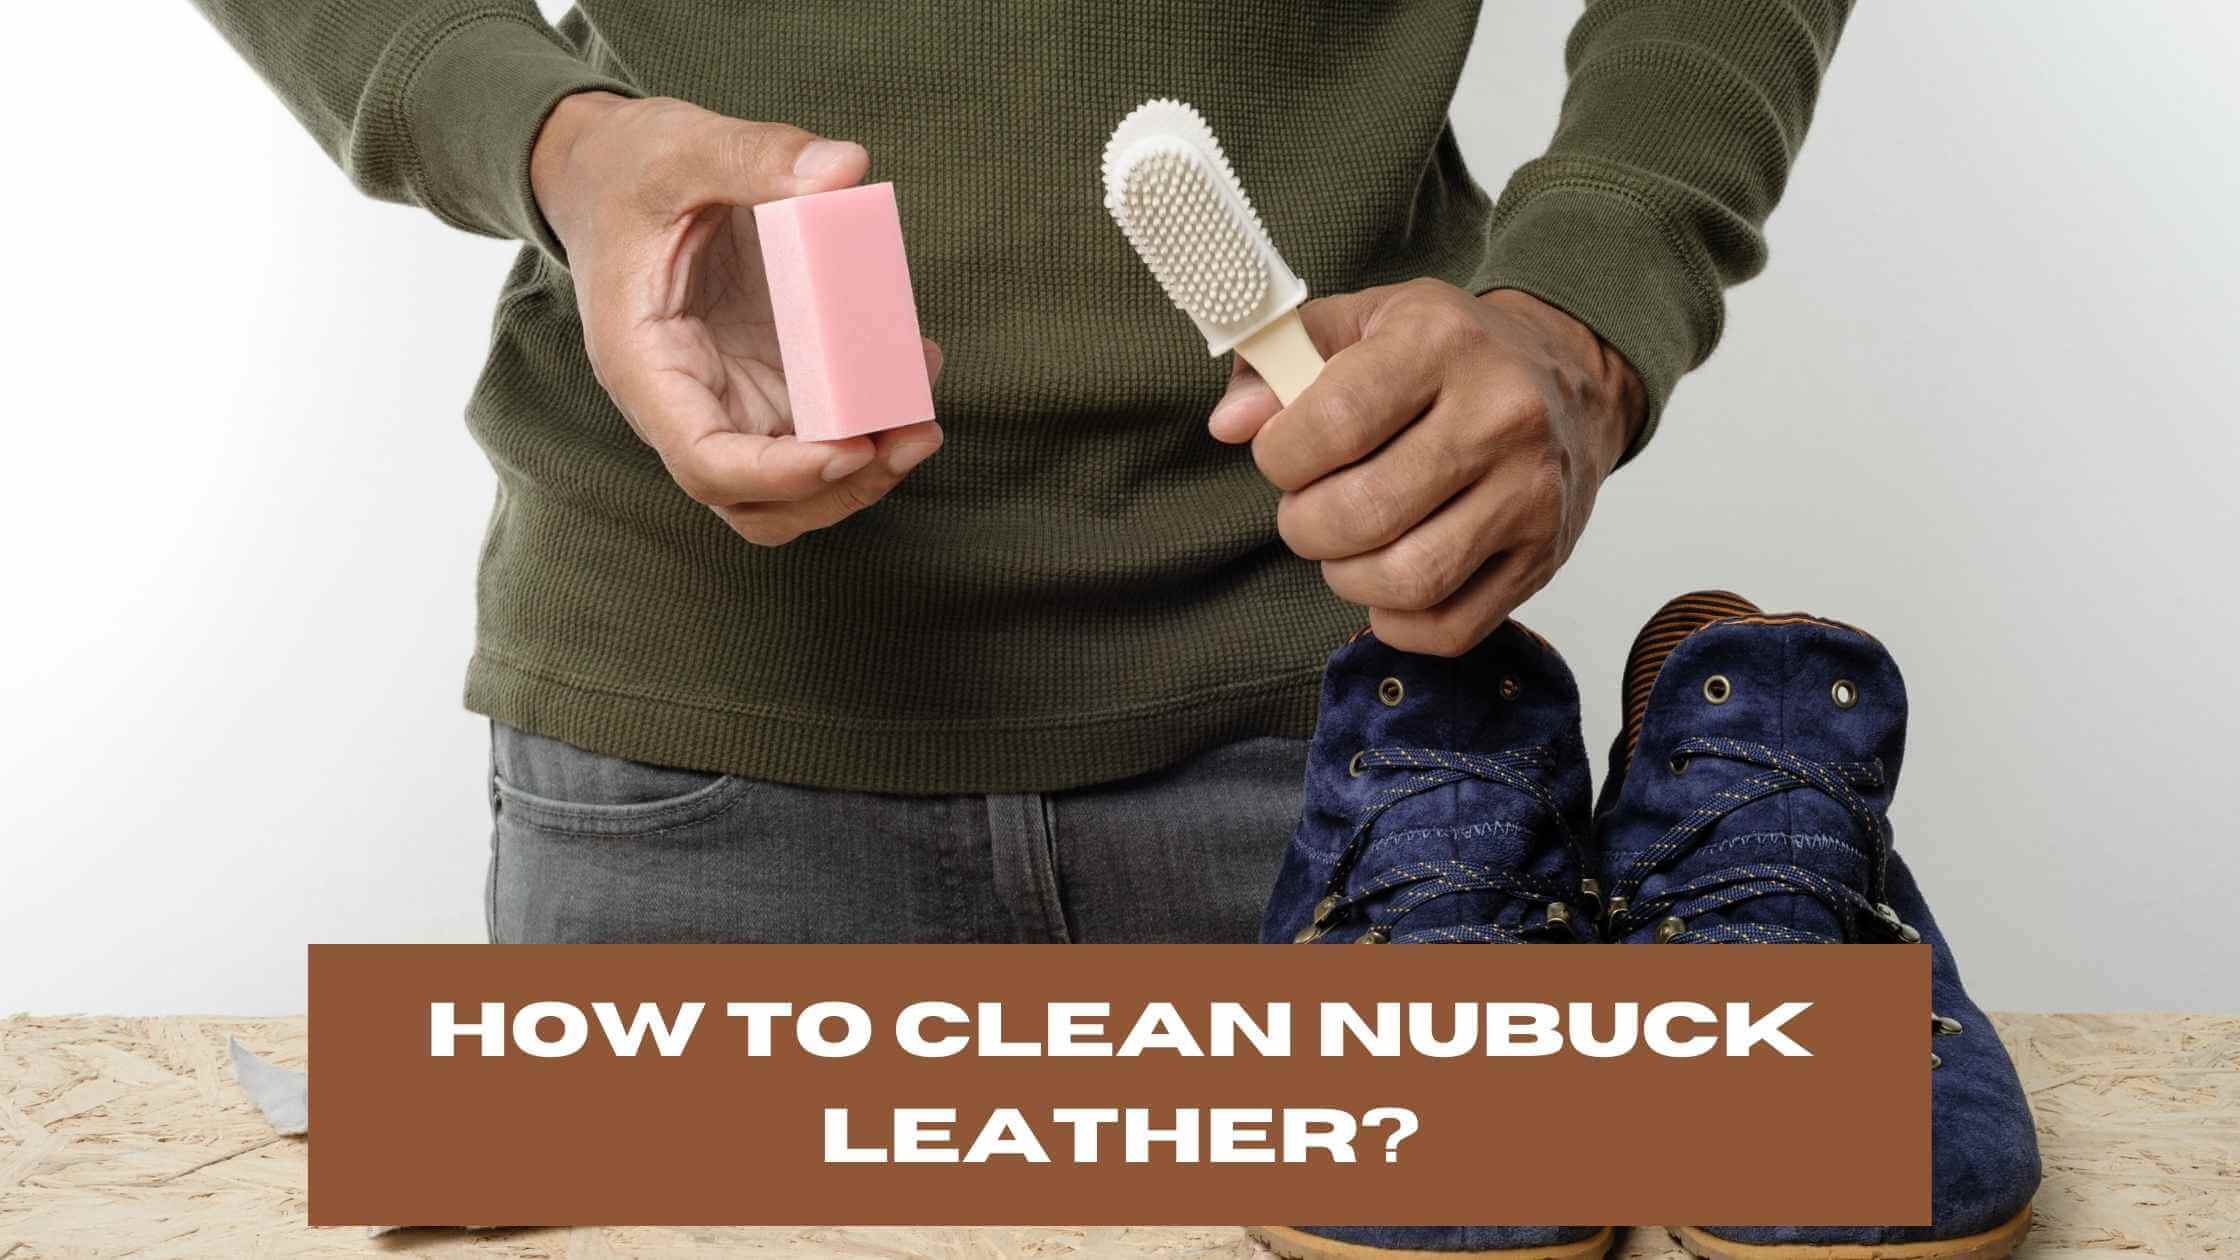 How to Clean Nubuck Leather